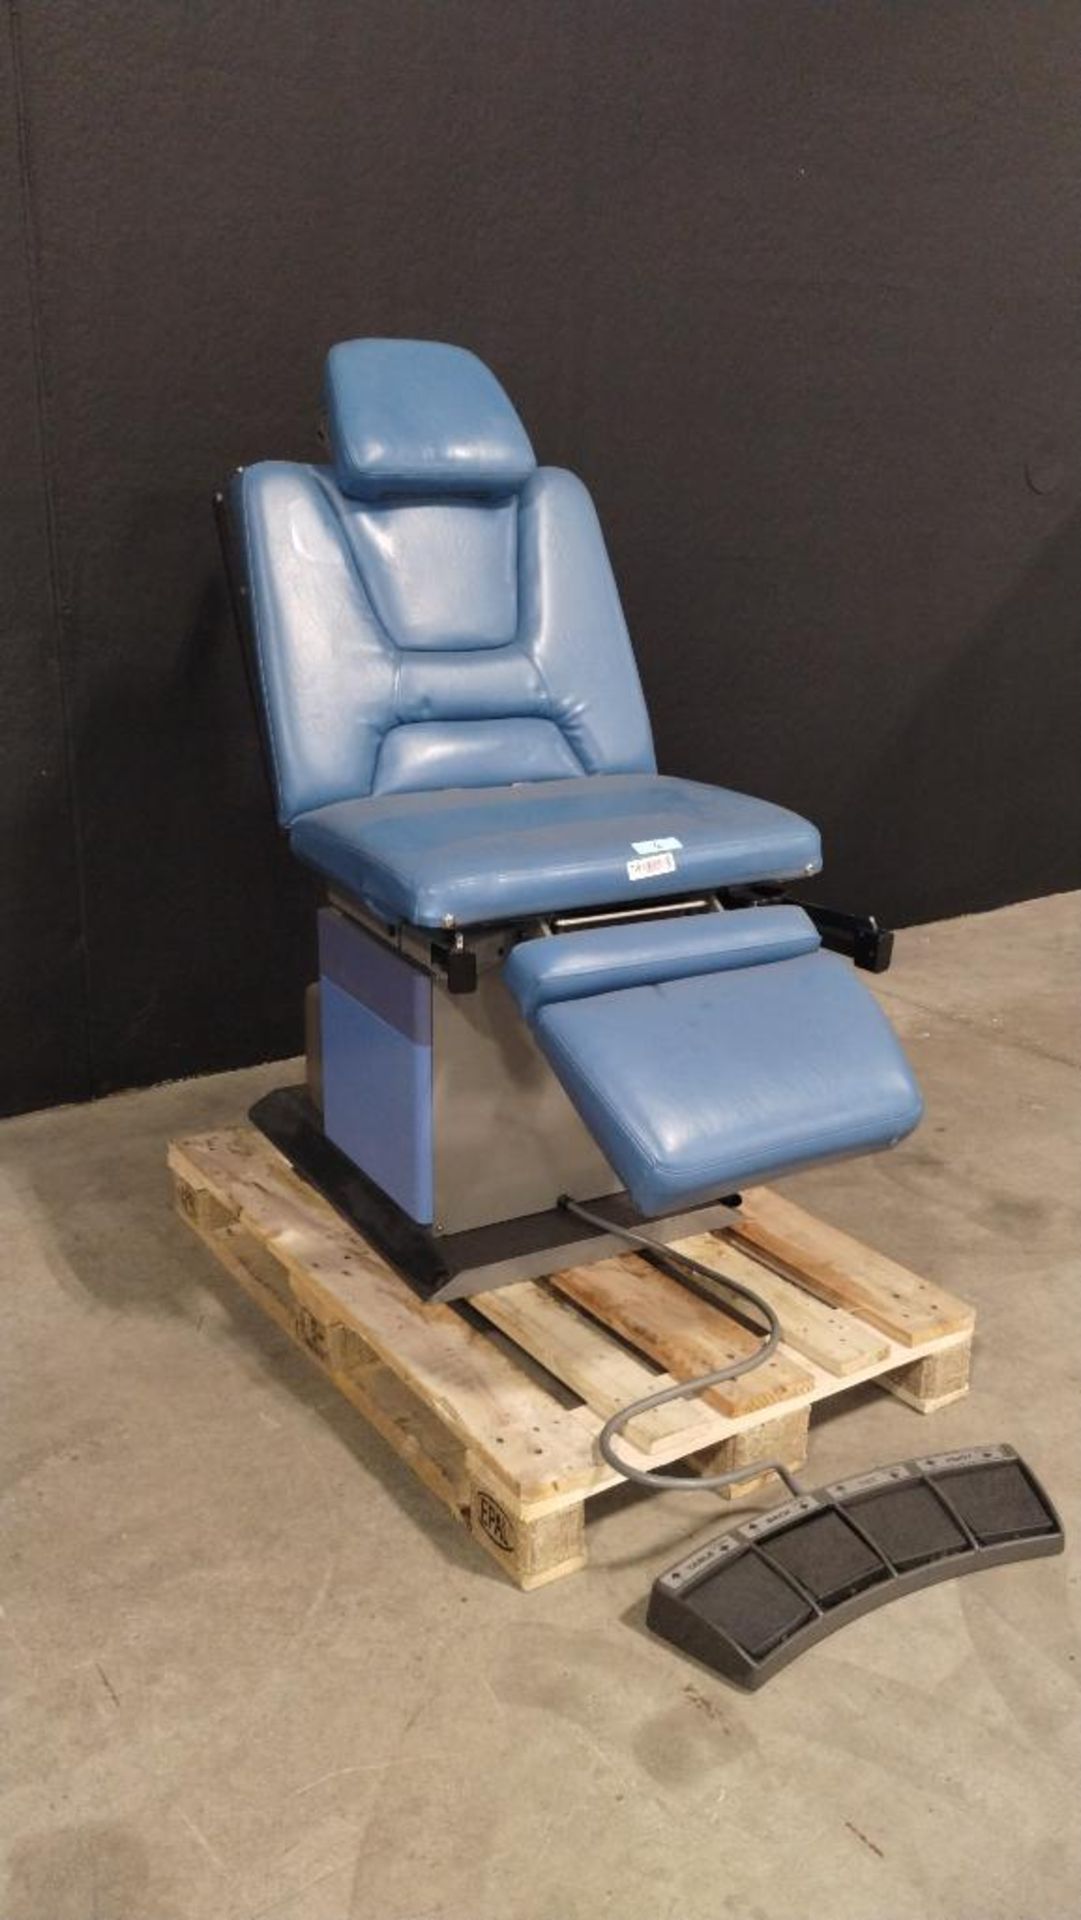 RITTER 75 SPECIAL EDITION POWER EXAM CHAIR WITH FOOTSWITCH - Image 2 of 3